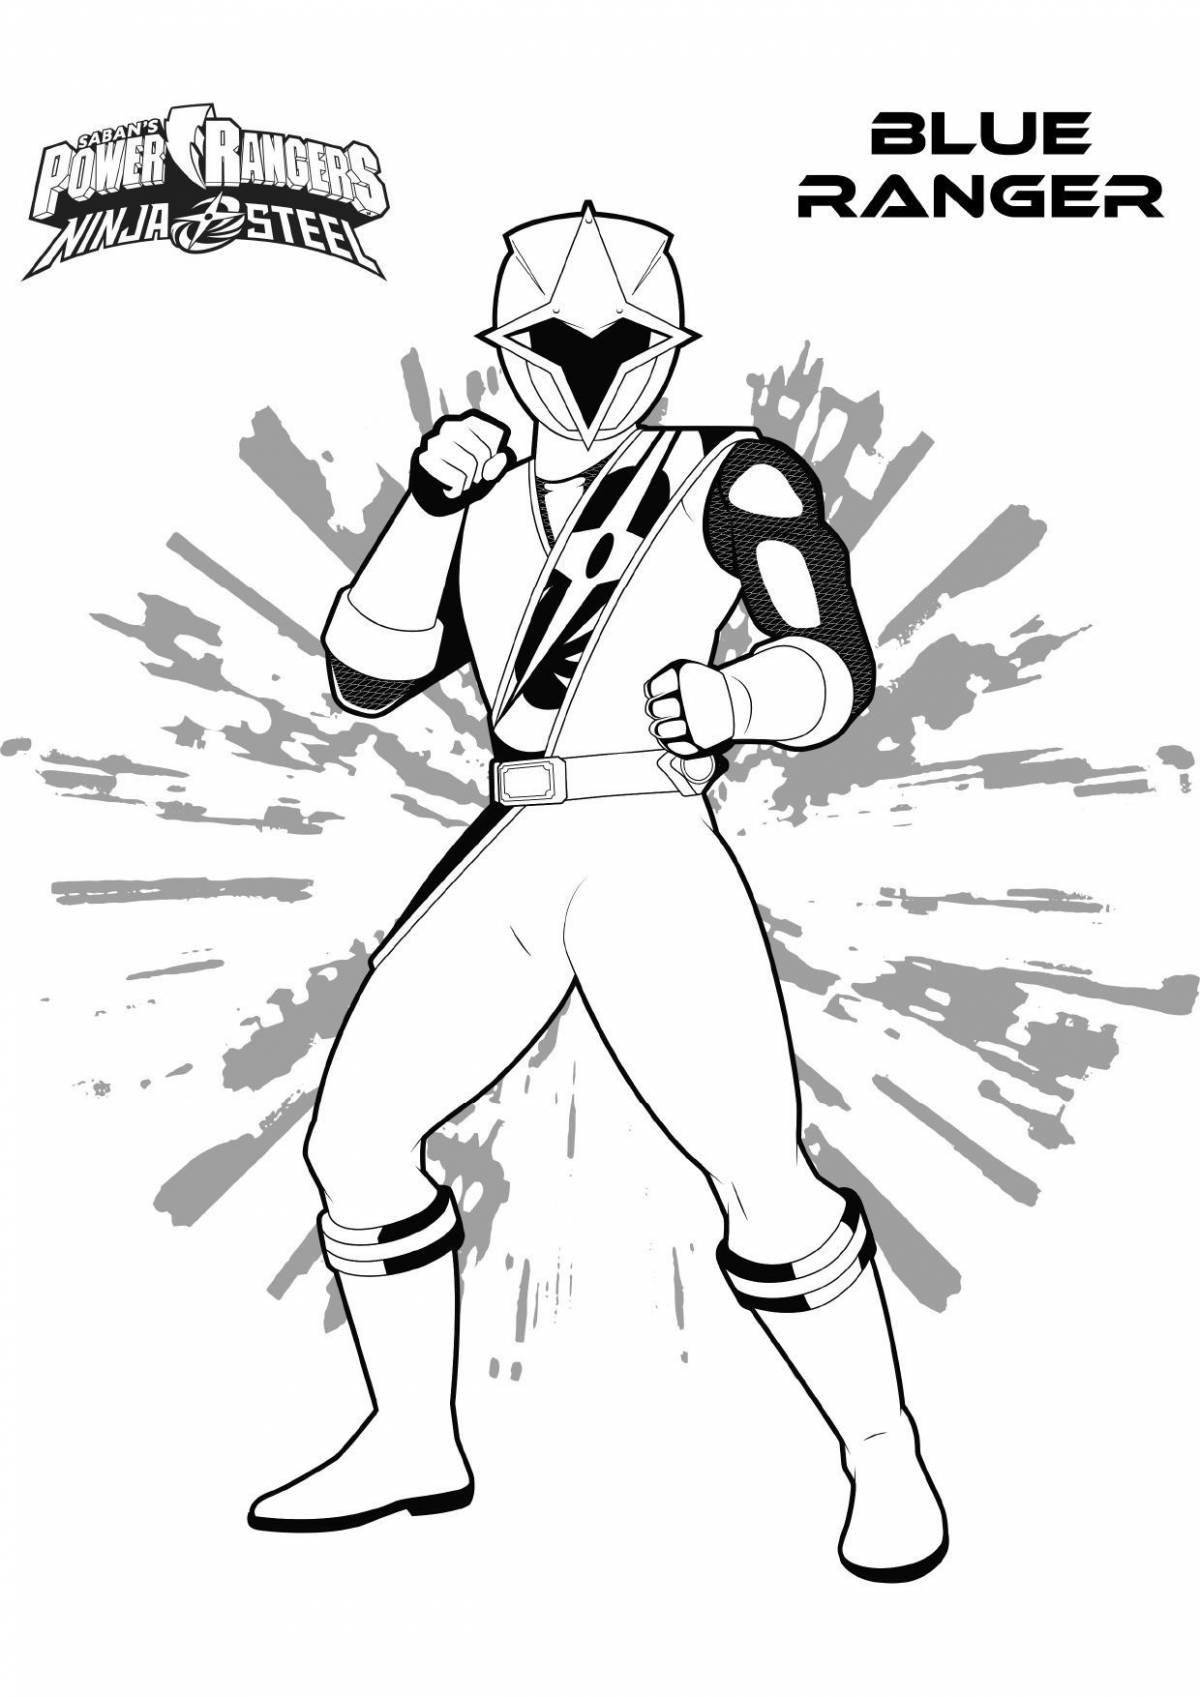 Fabulous Roger Ranger Coloring Page